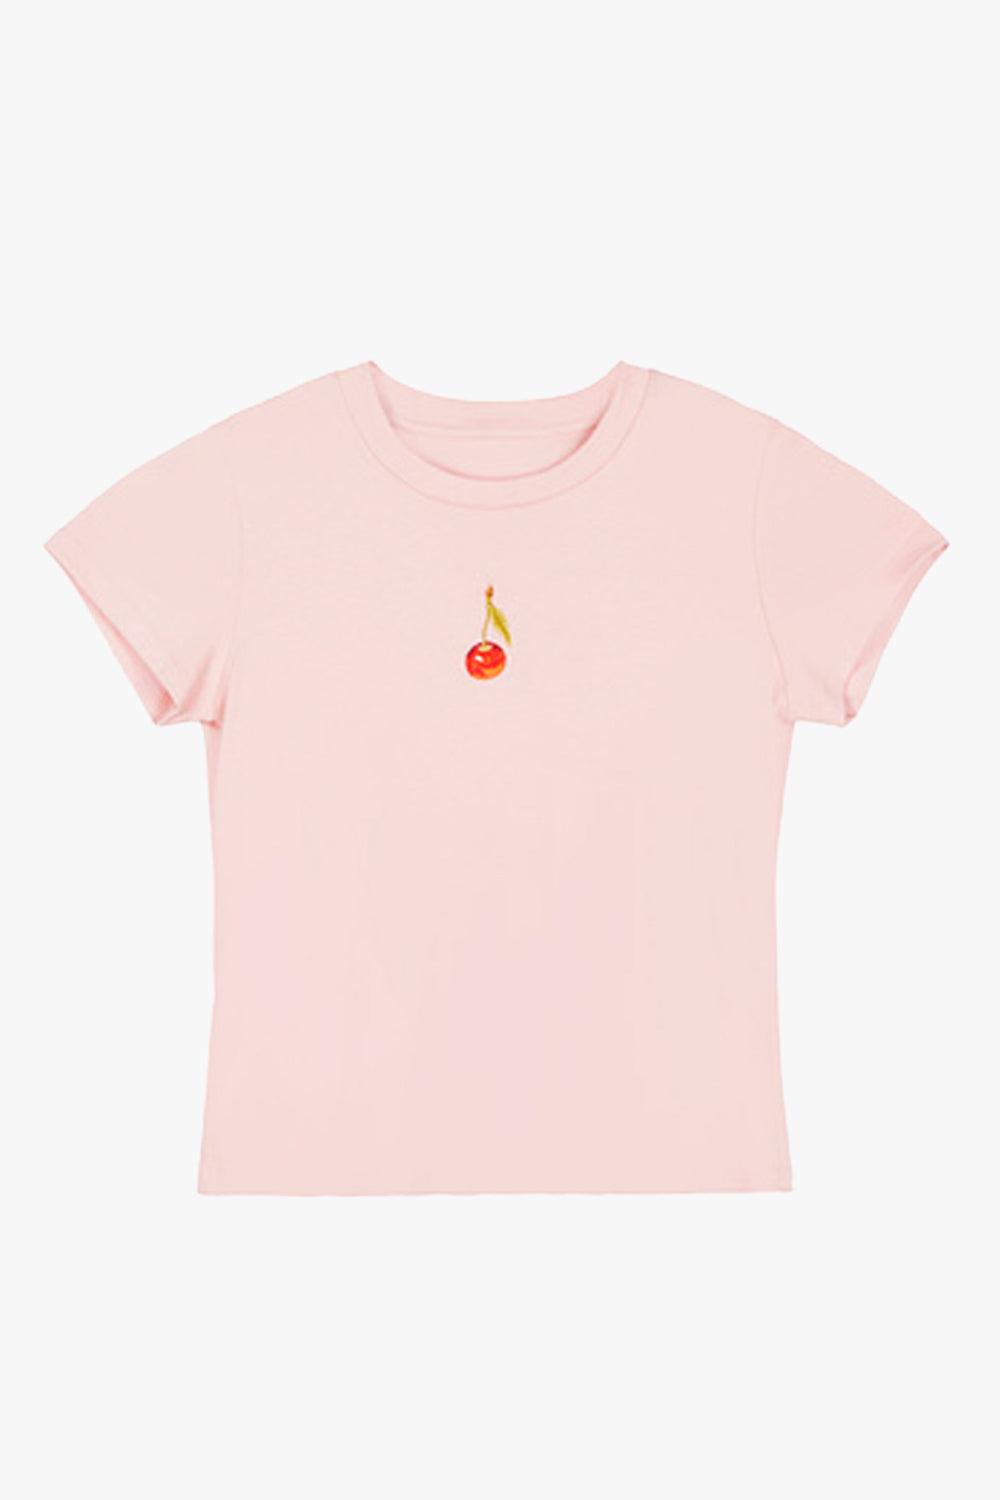 Cherry Note Aesthetic T-Shirt - Aesthetic Clothes Shop